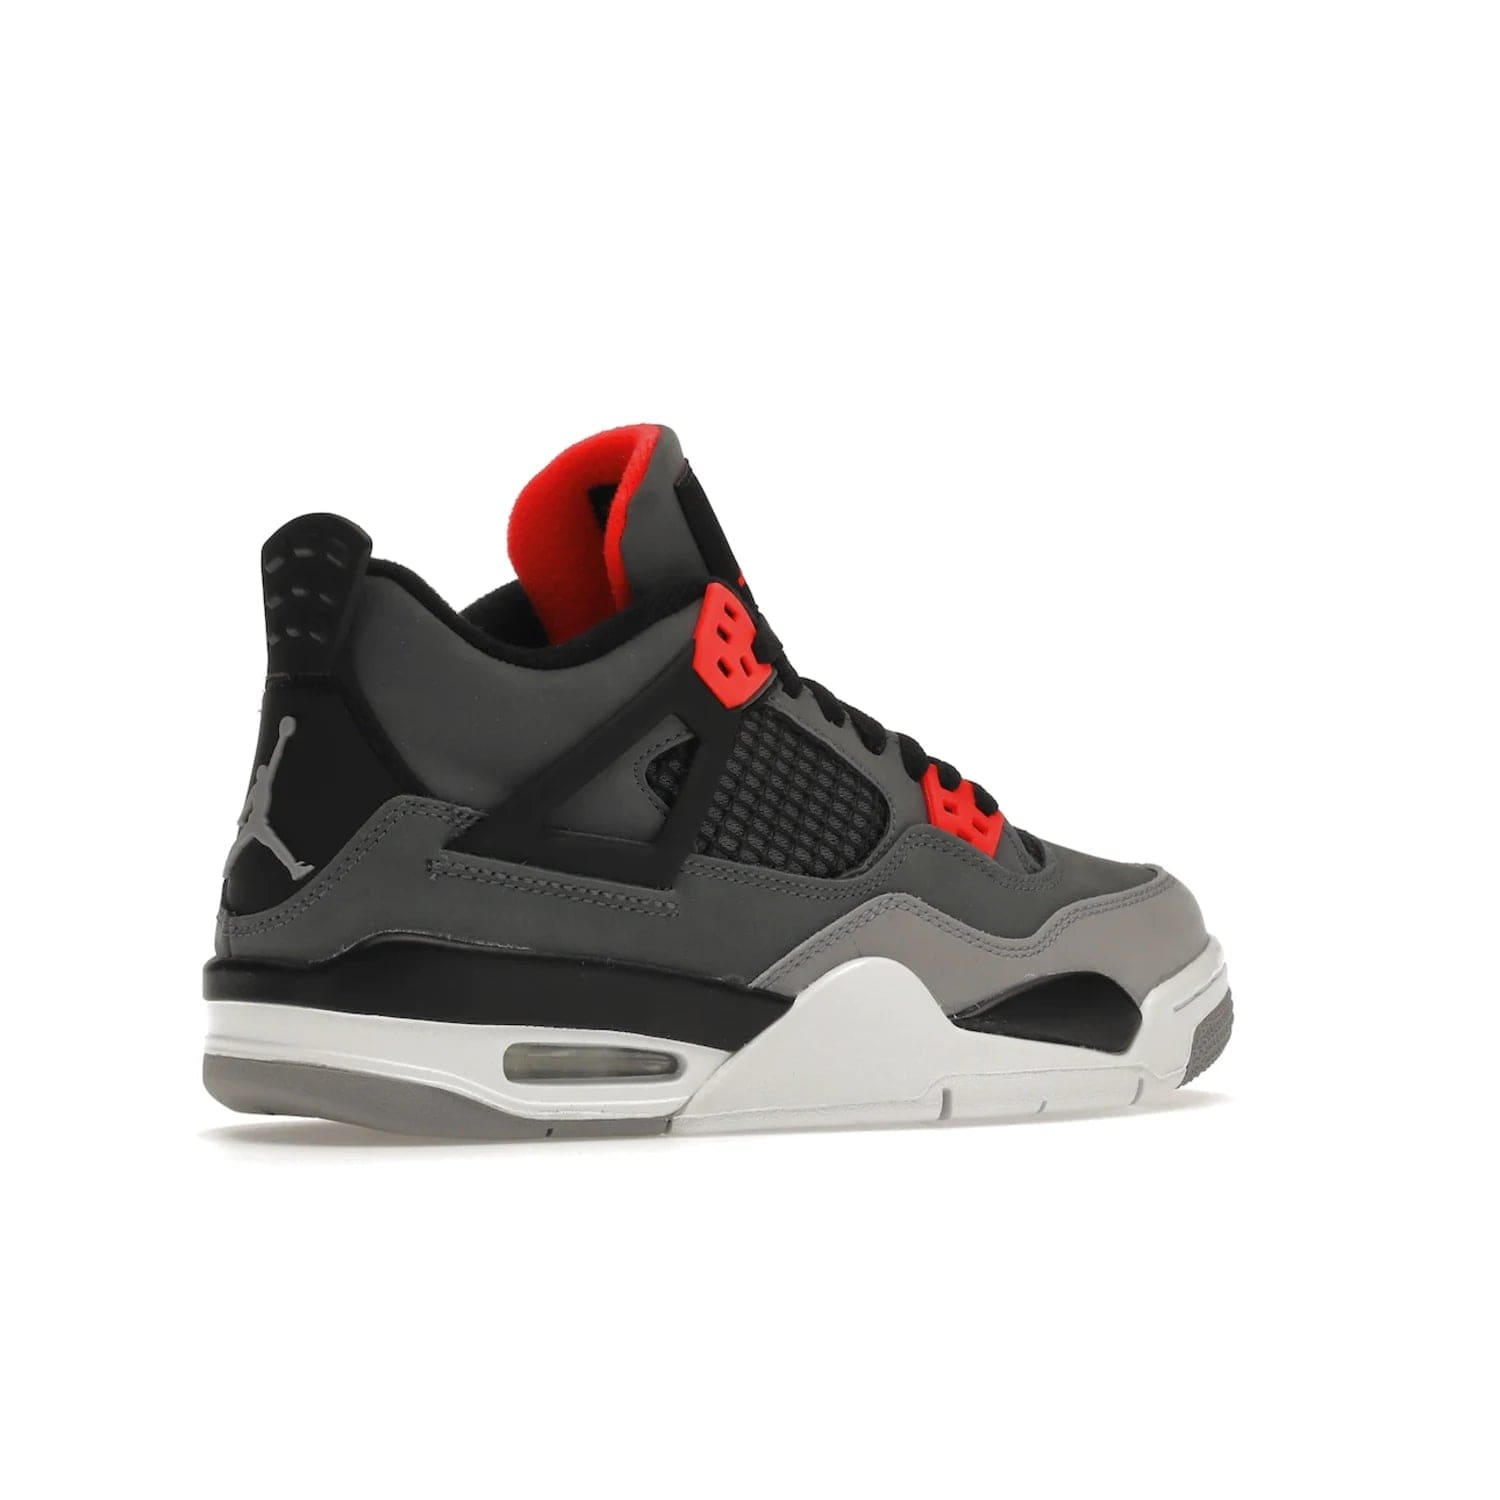 Jordan 4 Retro Infrared (GS) - Image 34 - Only at www.BallersClubKickz.com - Shop the Air Jordan 4 Retro Infrared (GS) for a classic silhouette with subtle yet bold features. Dark grey nubuck upper with lighter forefoot overlay, black accents, Infrared molded eyelets & woven tongue tag. Available June 2022.